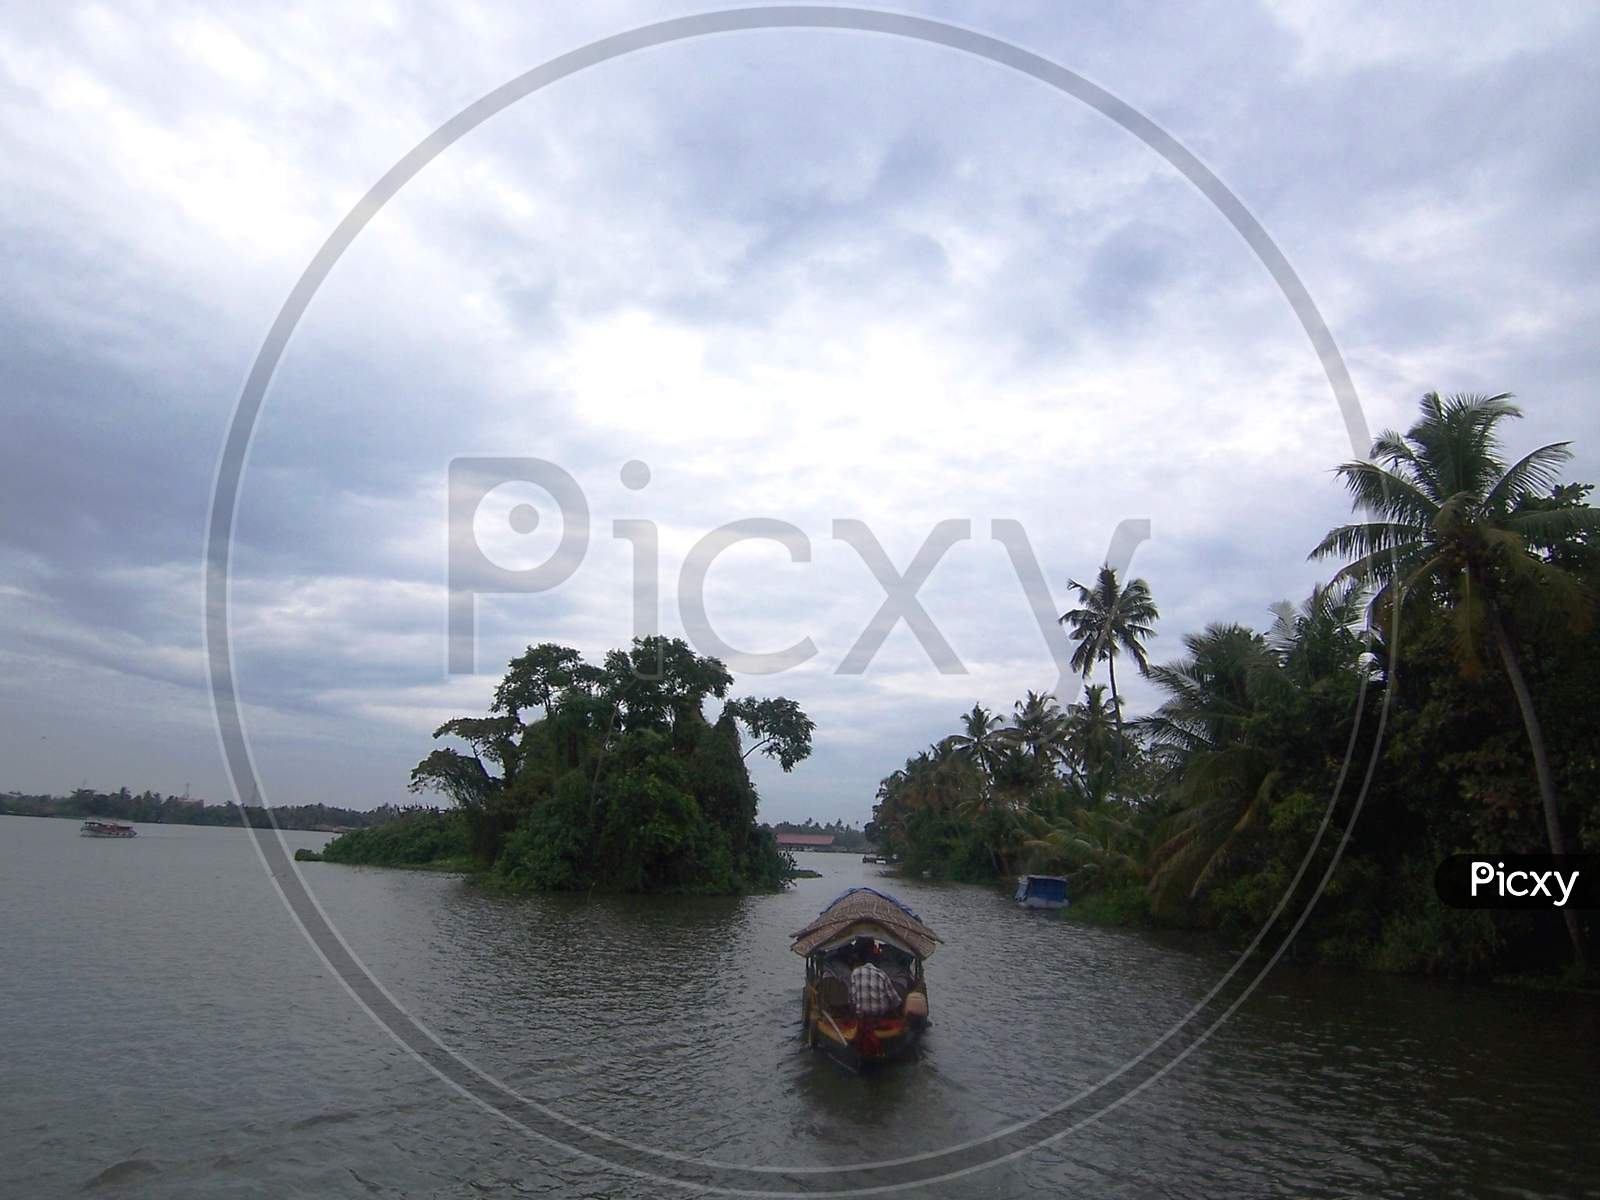 Boat, coconut trees, island and clouds at alleppey, kerala backwaters